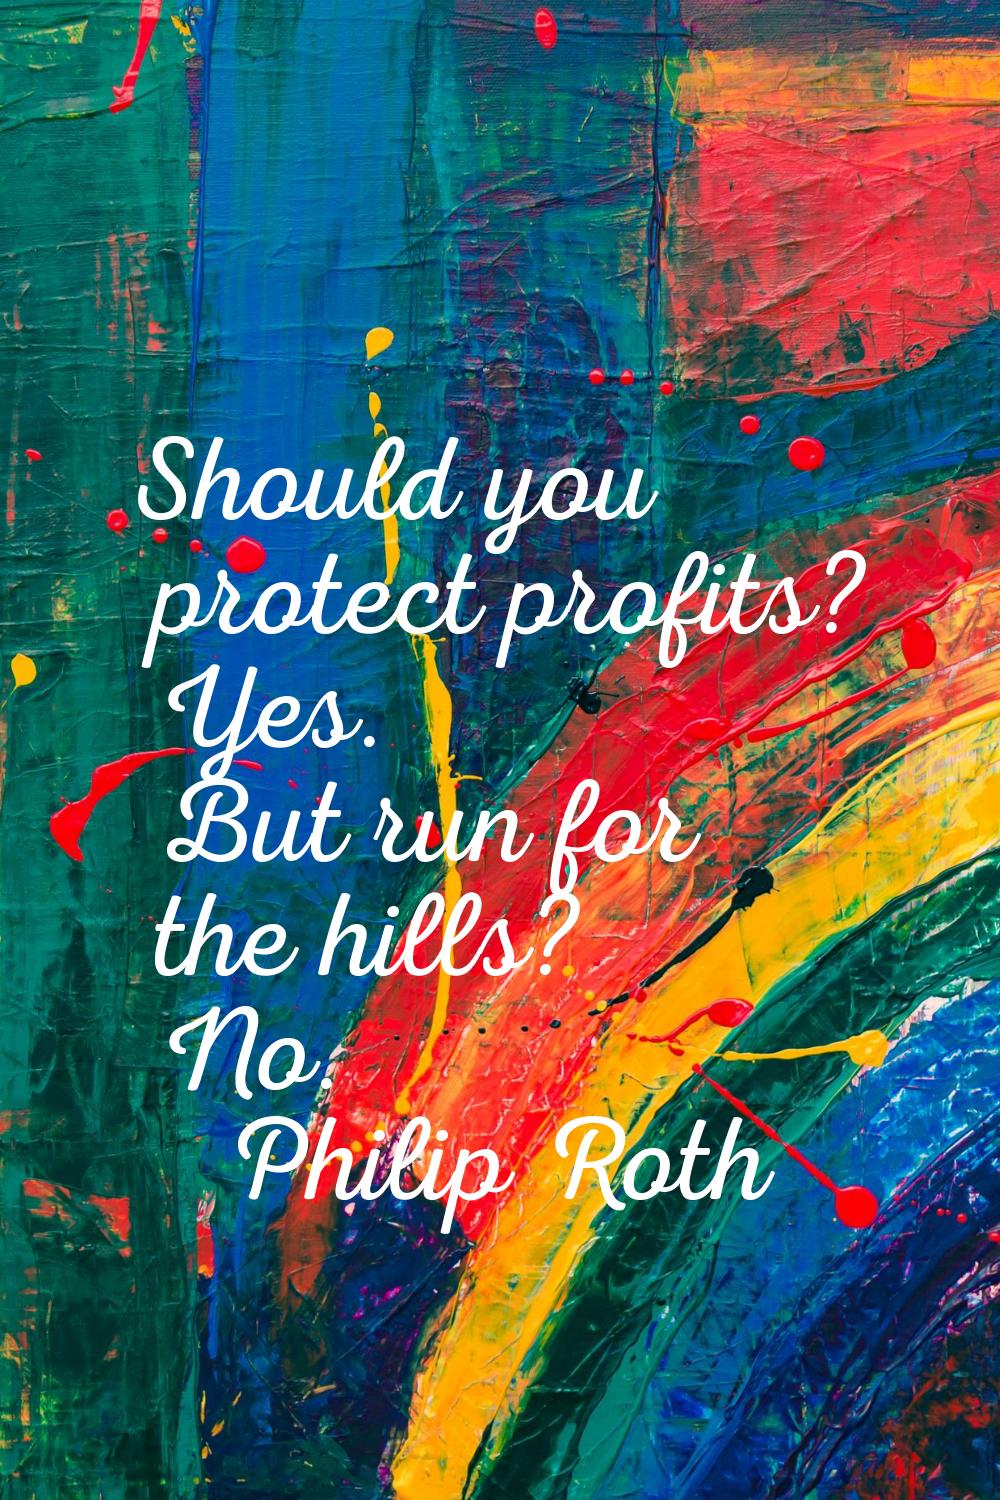 Should you protect profits? Yes. But run for the hills? No.